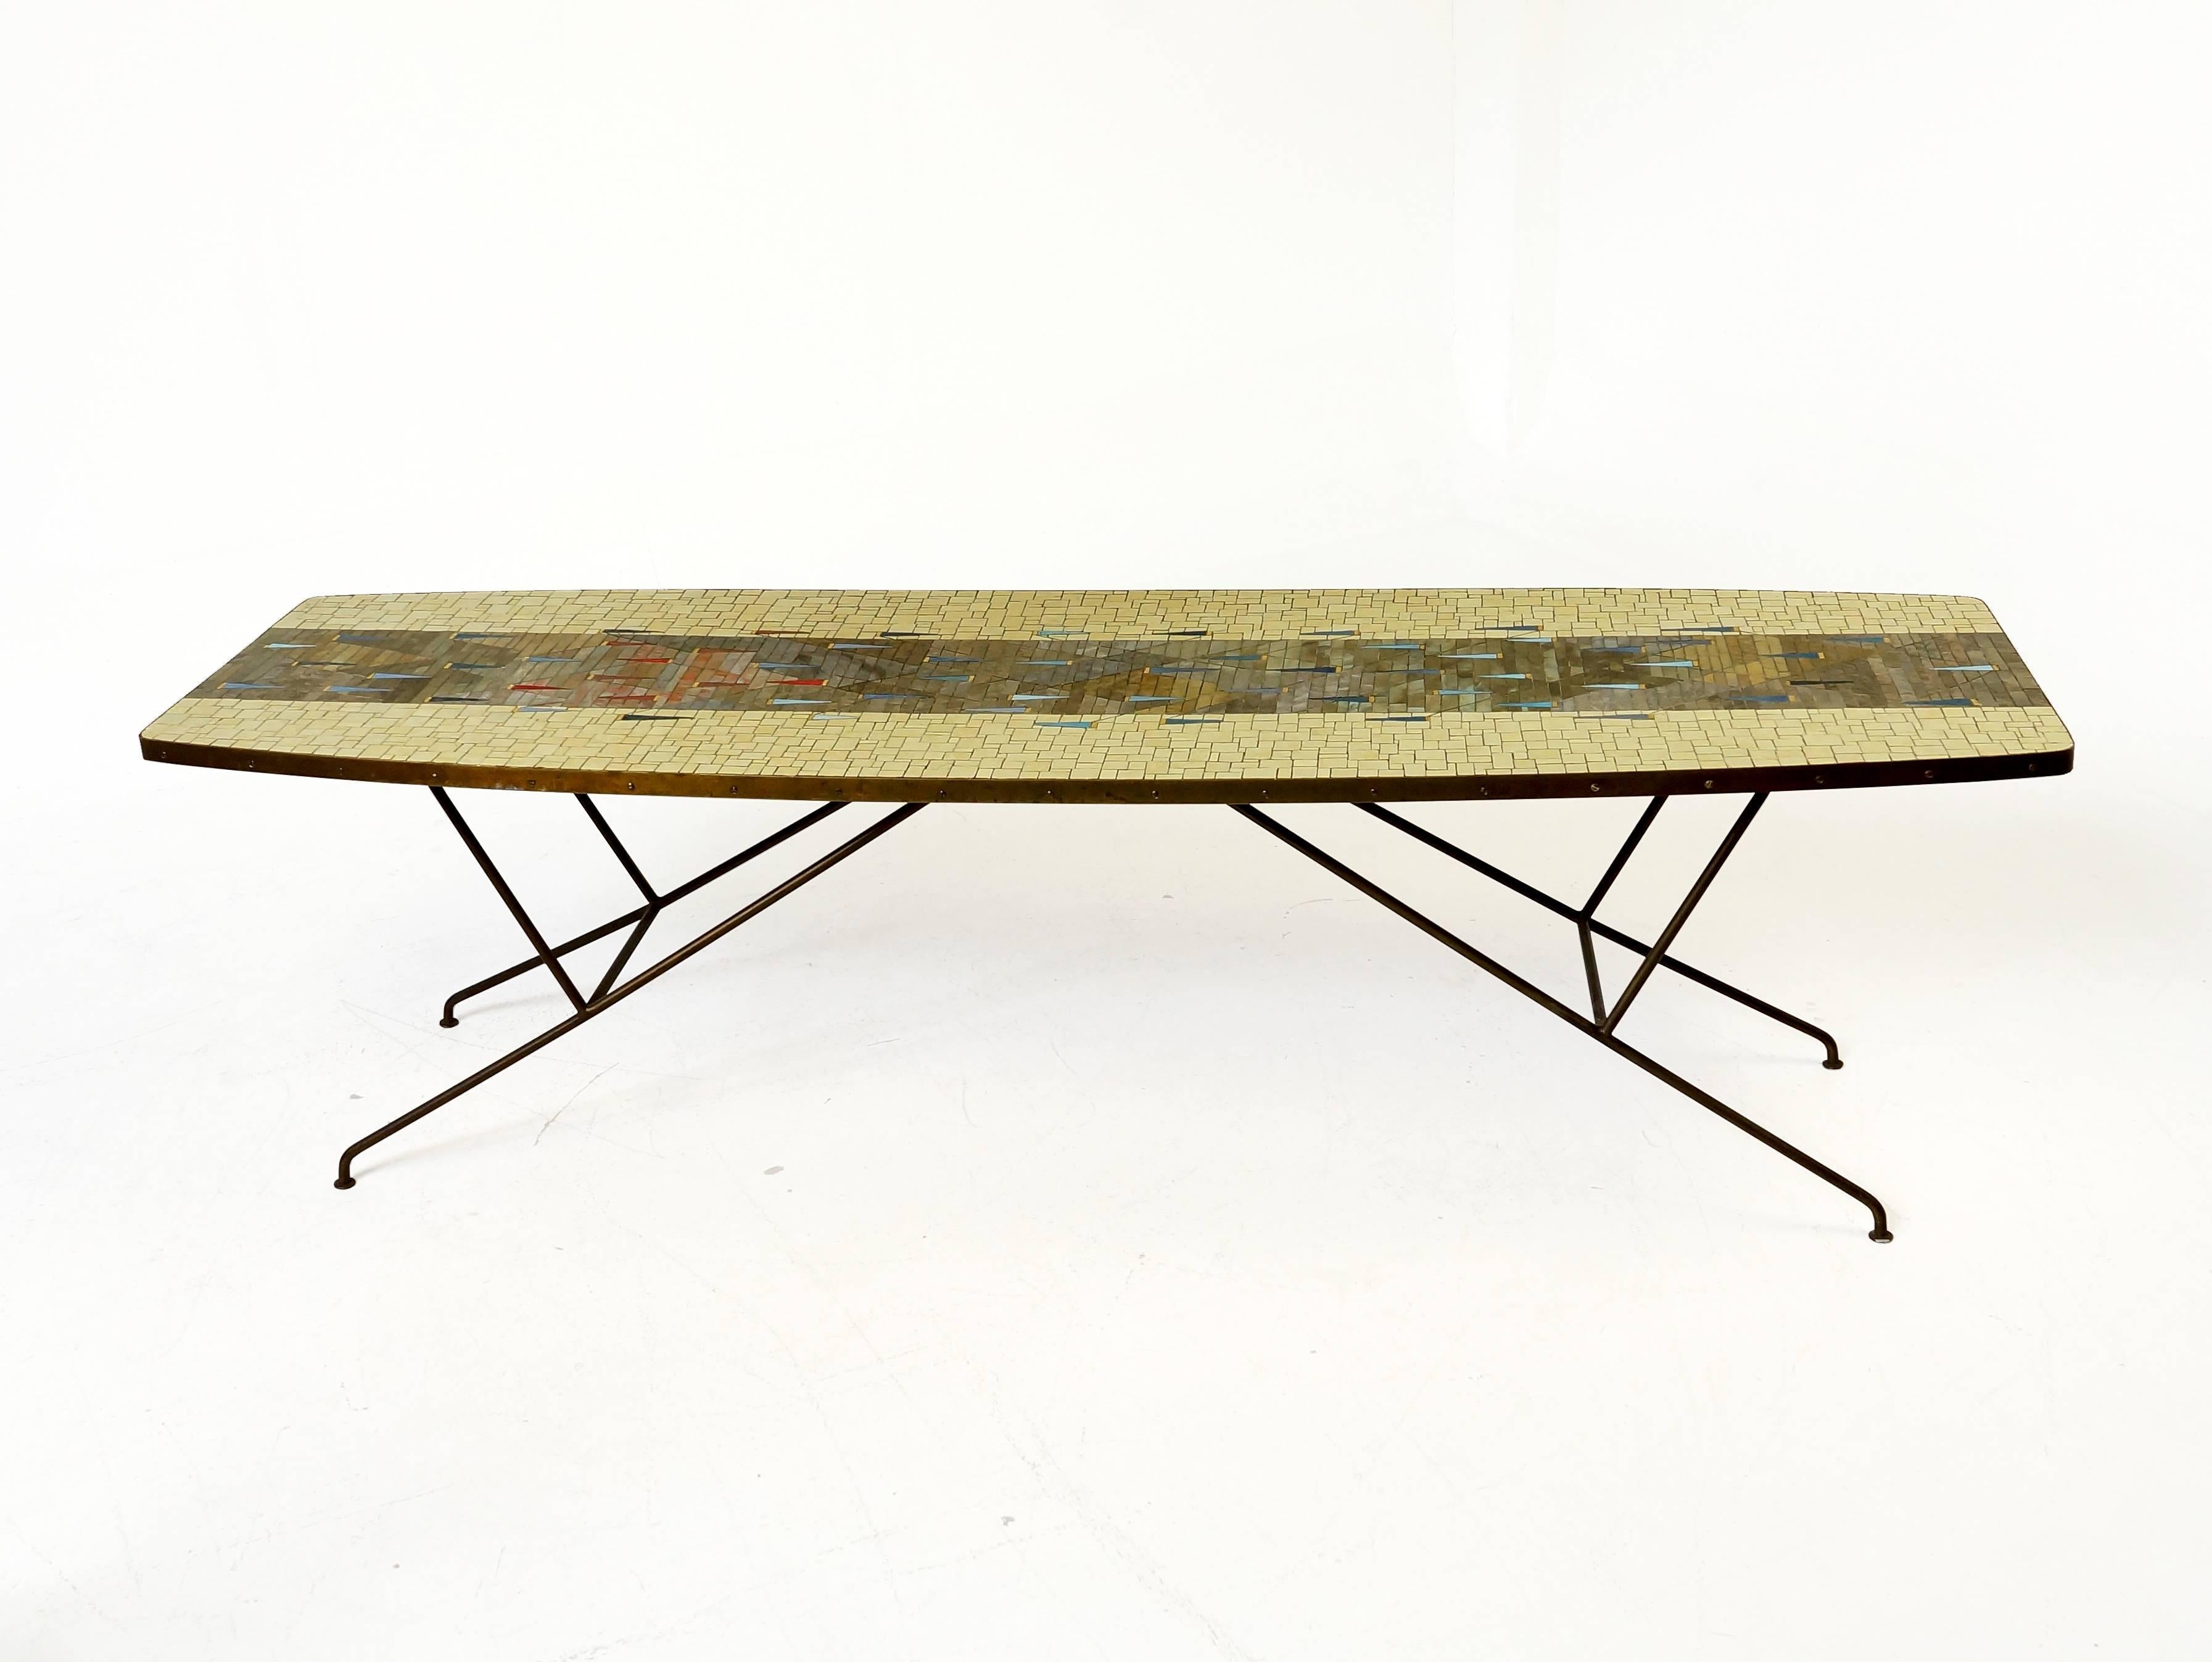 A beautiful, large Italian coffee table with glass mosaic top and impressive brass legs. Made in Italy in the 1950s. In very good condition with patina on the brass edge around the table and the base. To be use as a coffee table or even as a table